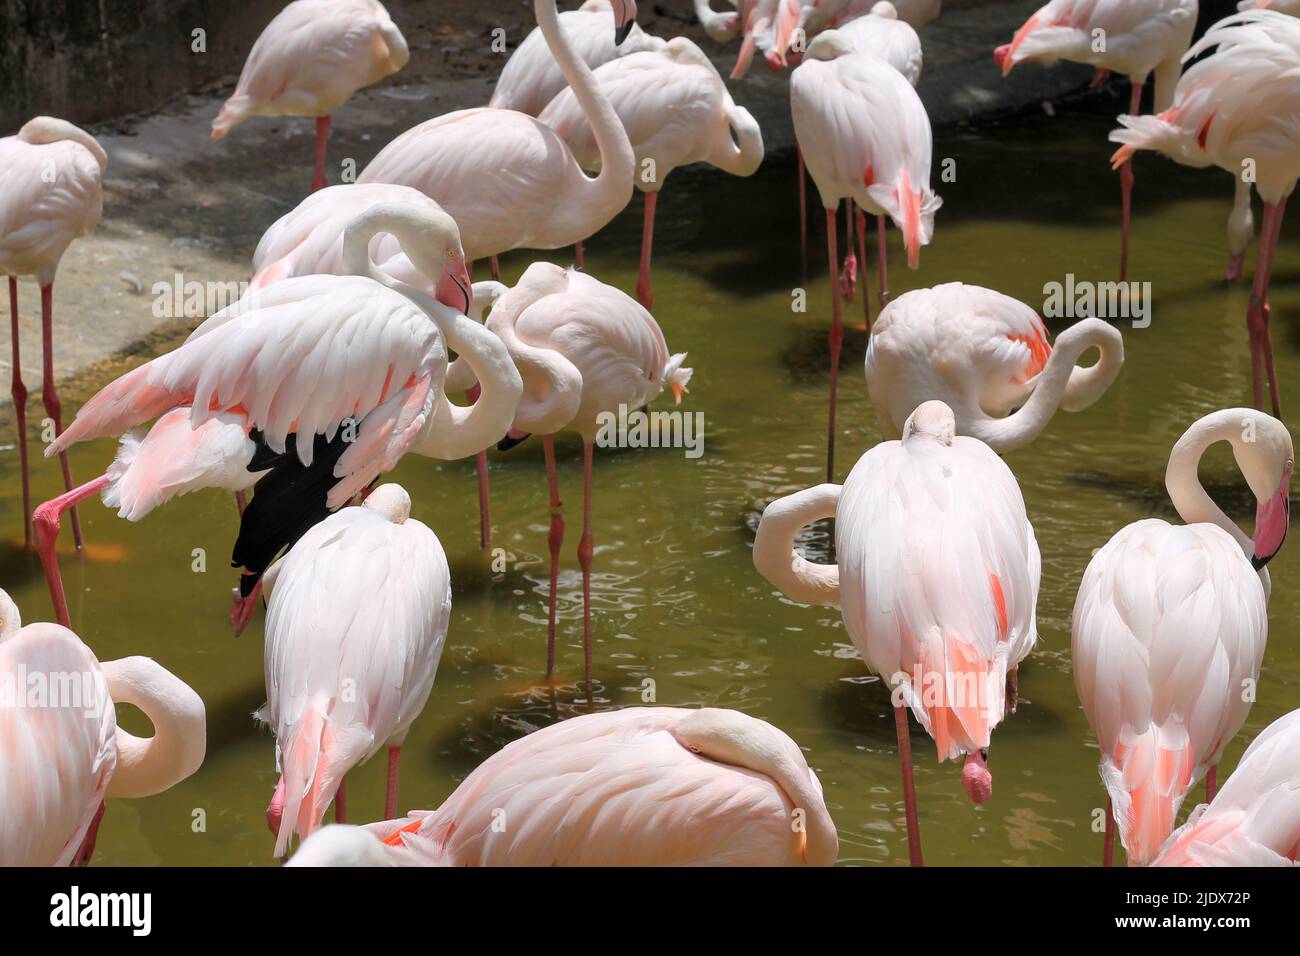 Flamingos in a pond in a zoo in Thailand intended for people to visit and gain knowledge about foreign animals Stock Photo